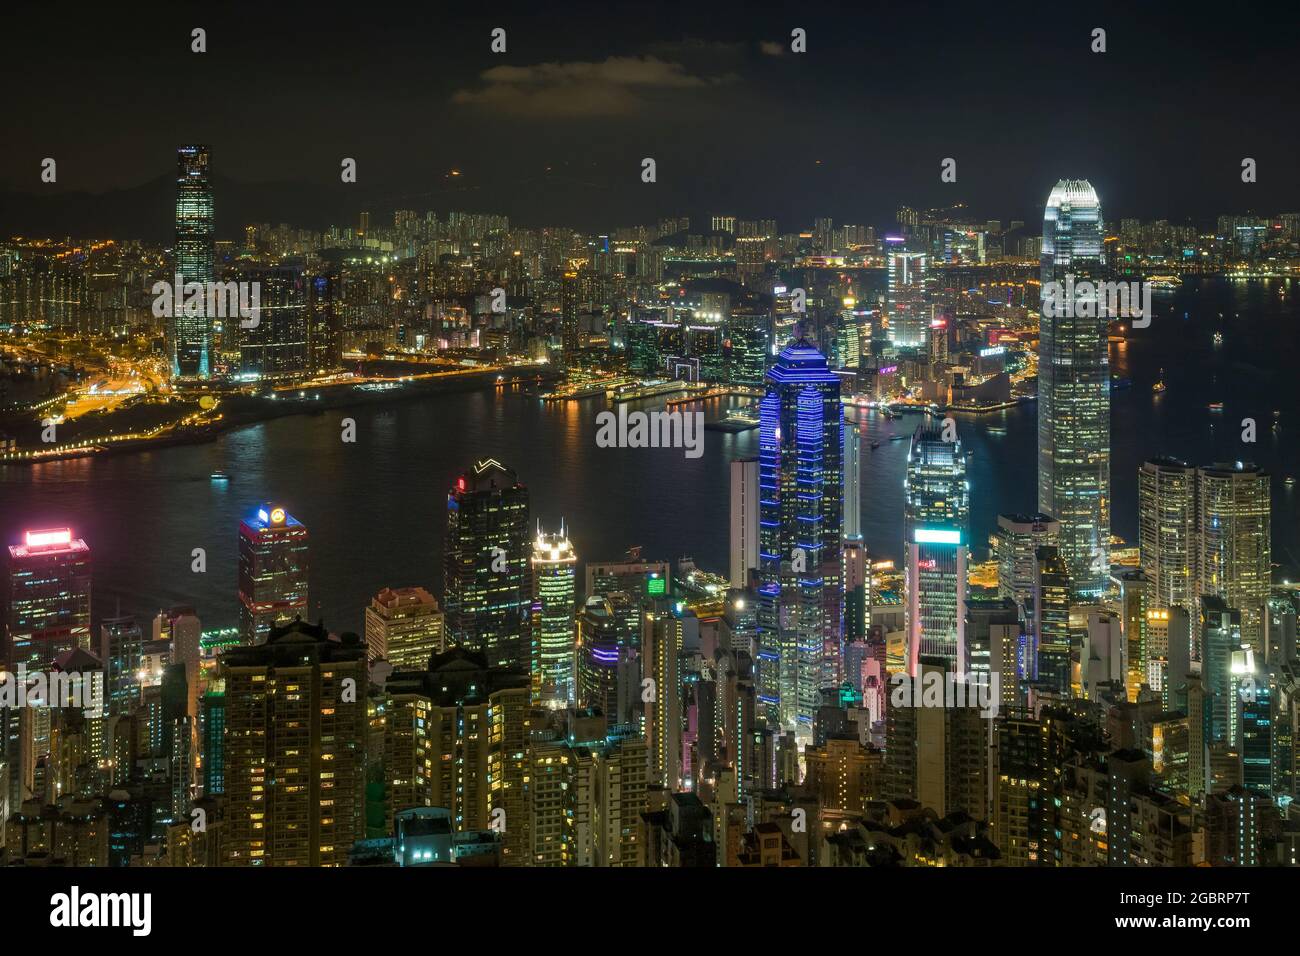 The skyscrapers and high density highrise urban landscape of Mid-levels and Central on Hong Kong Island, and Kowloon across Victoria Harbour, at night Stock Photo